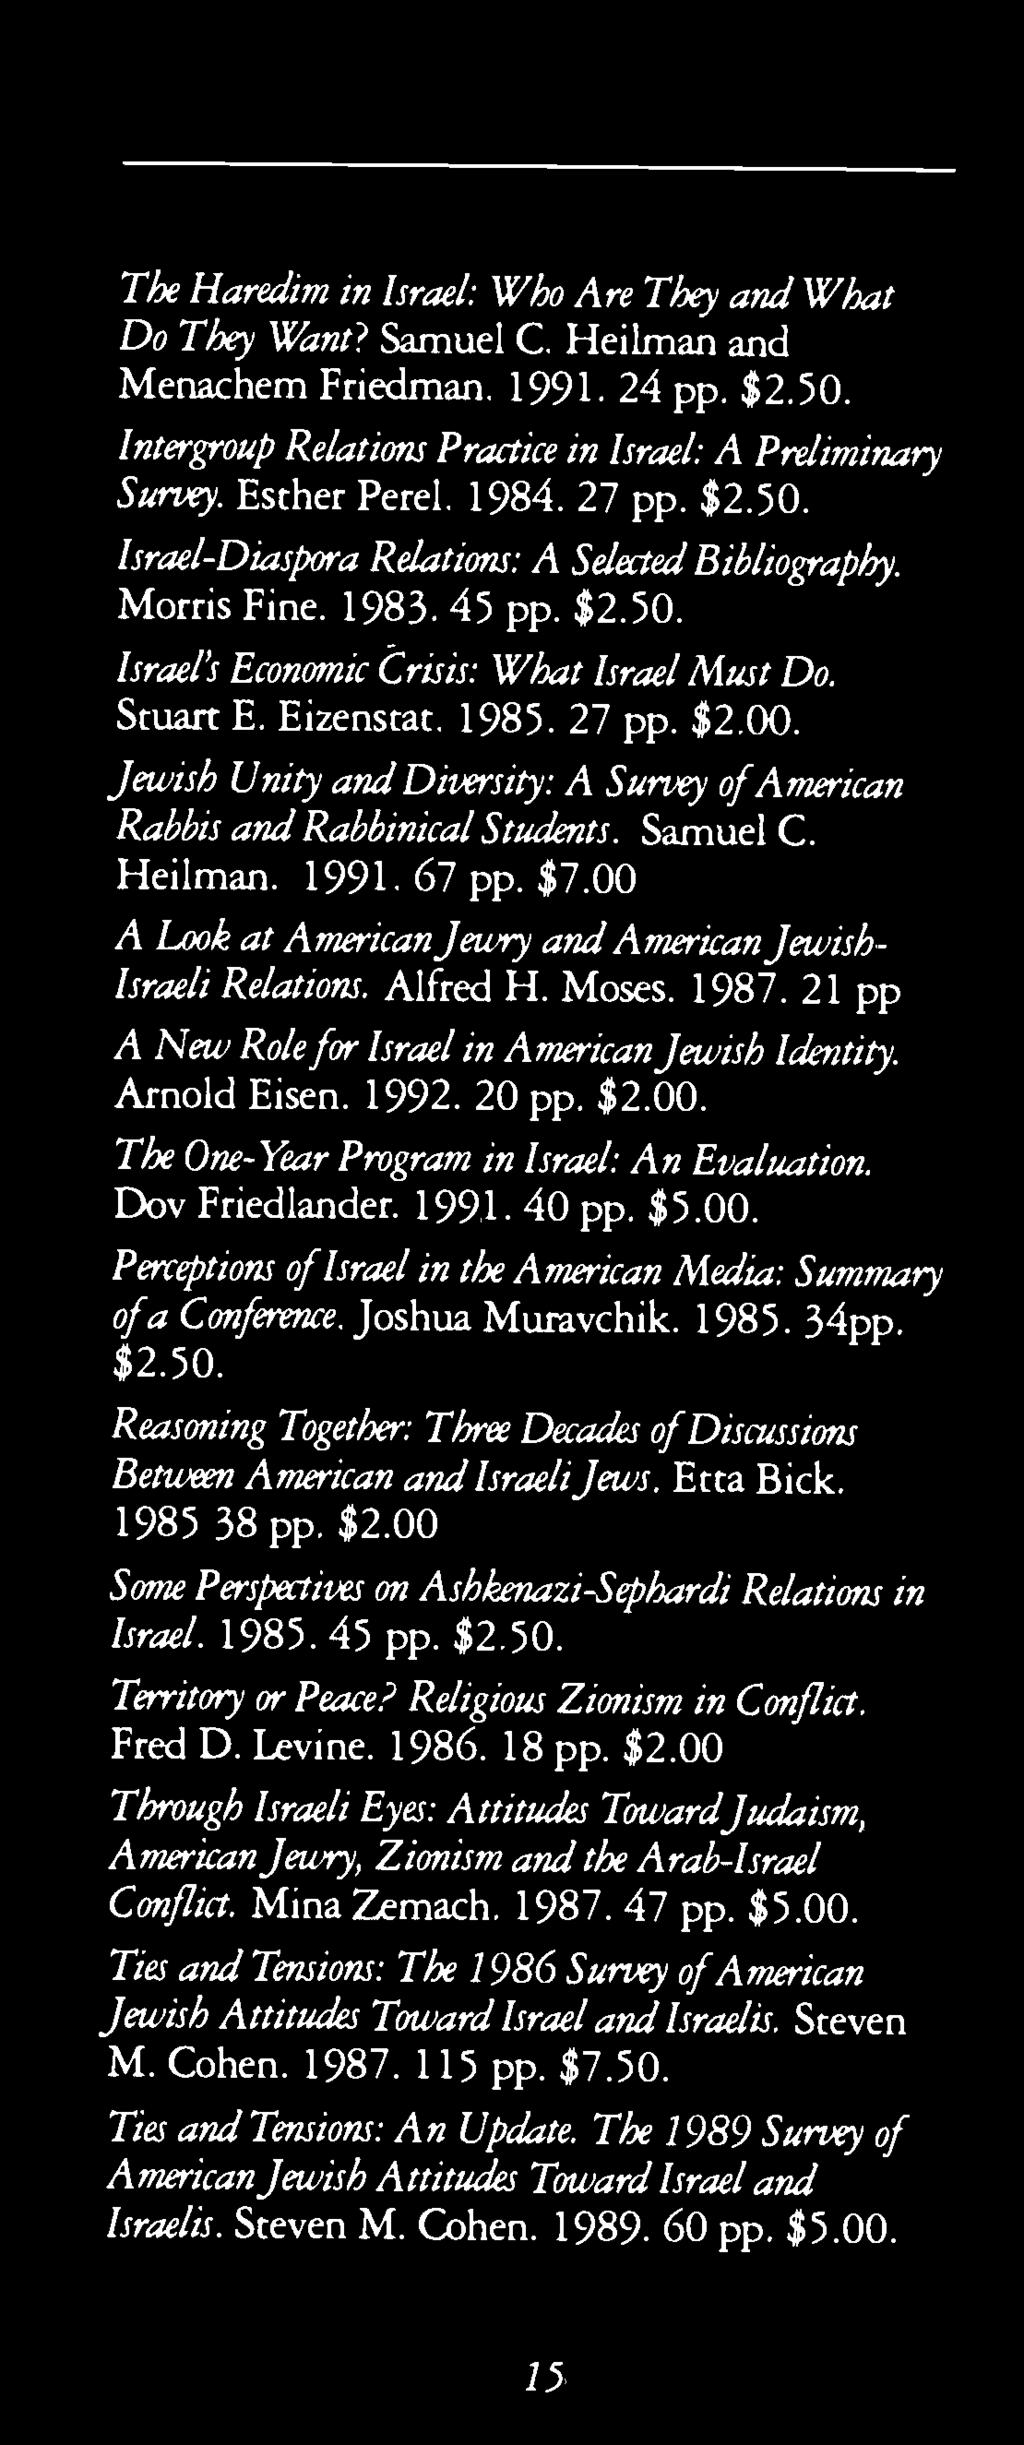 Jewish Unity and Diversity: A Survey of American Rabbis and Rabbinical Students. Samuel C. Heilman. 1991. 67 pp. $7.00 A Look at American Jewry and American Jewish- Israeli Relations. Alfred H. Moses.